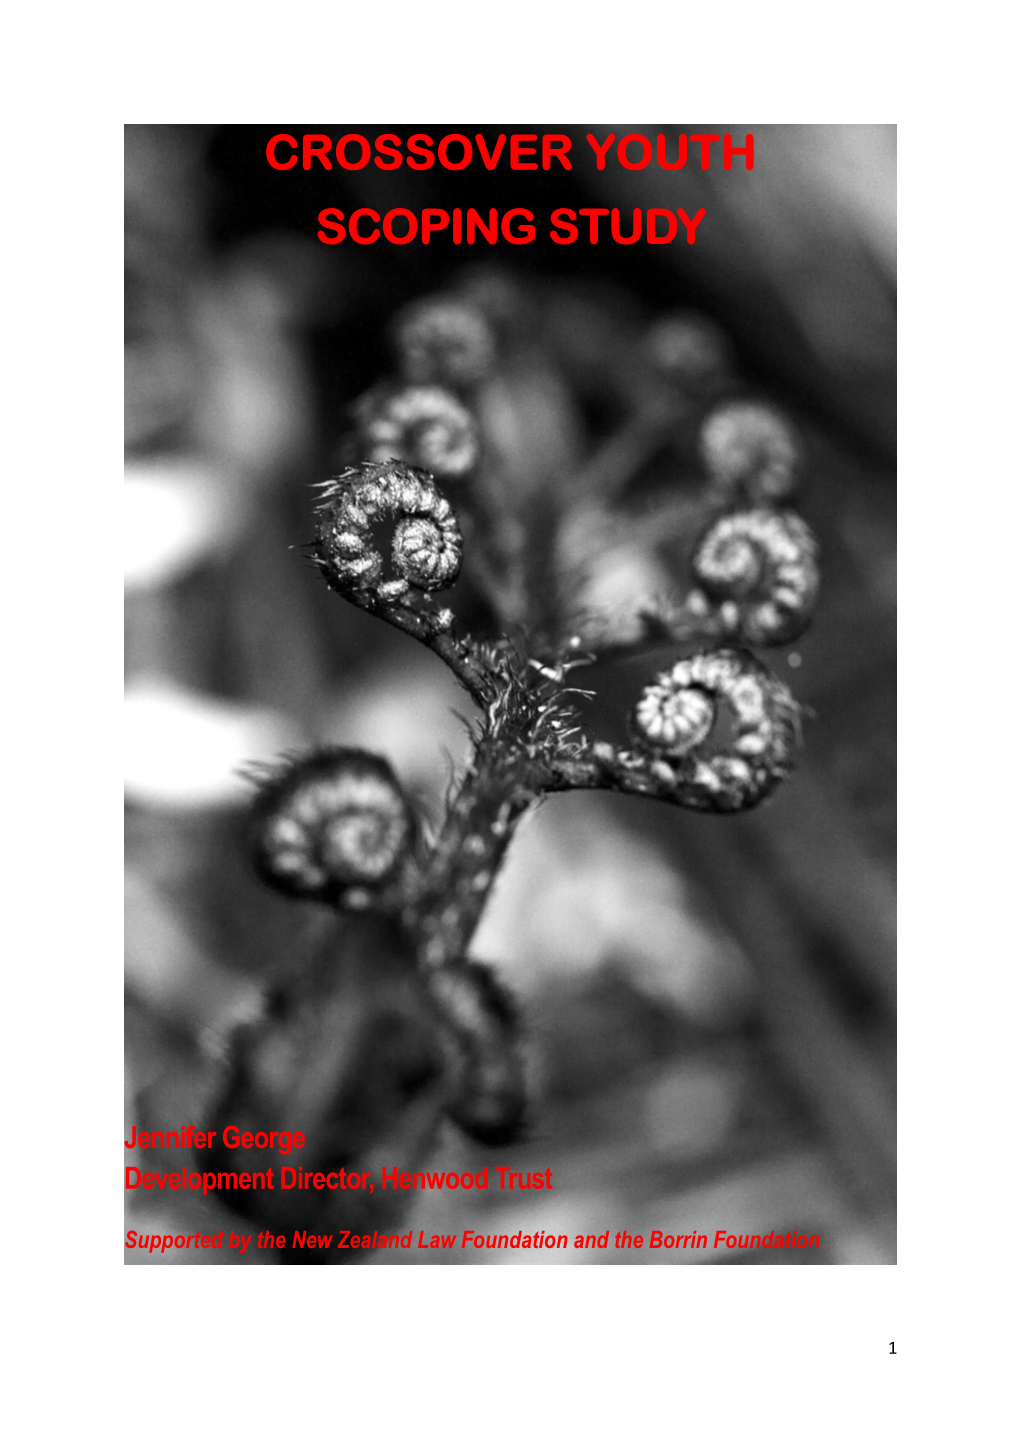 Crossover Youth Scoping Study April 2020